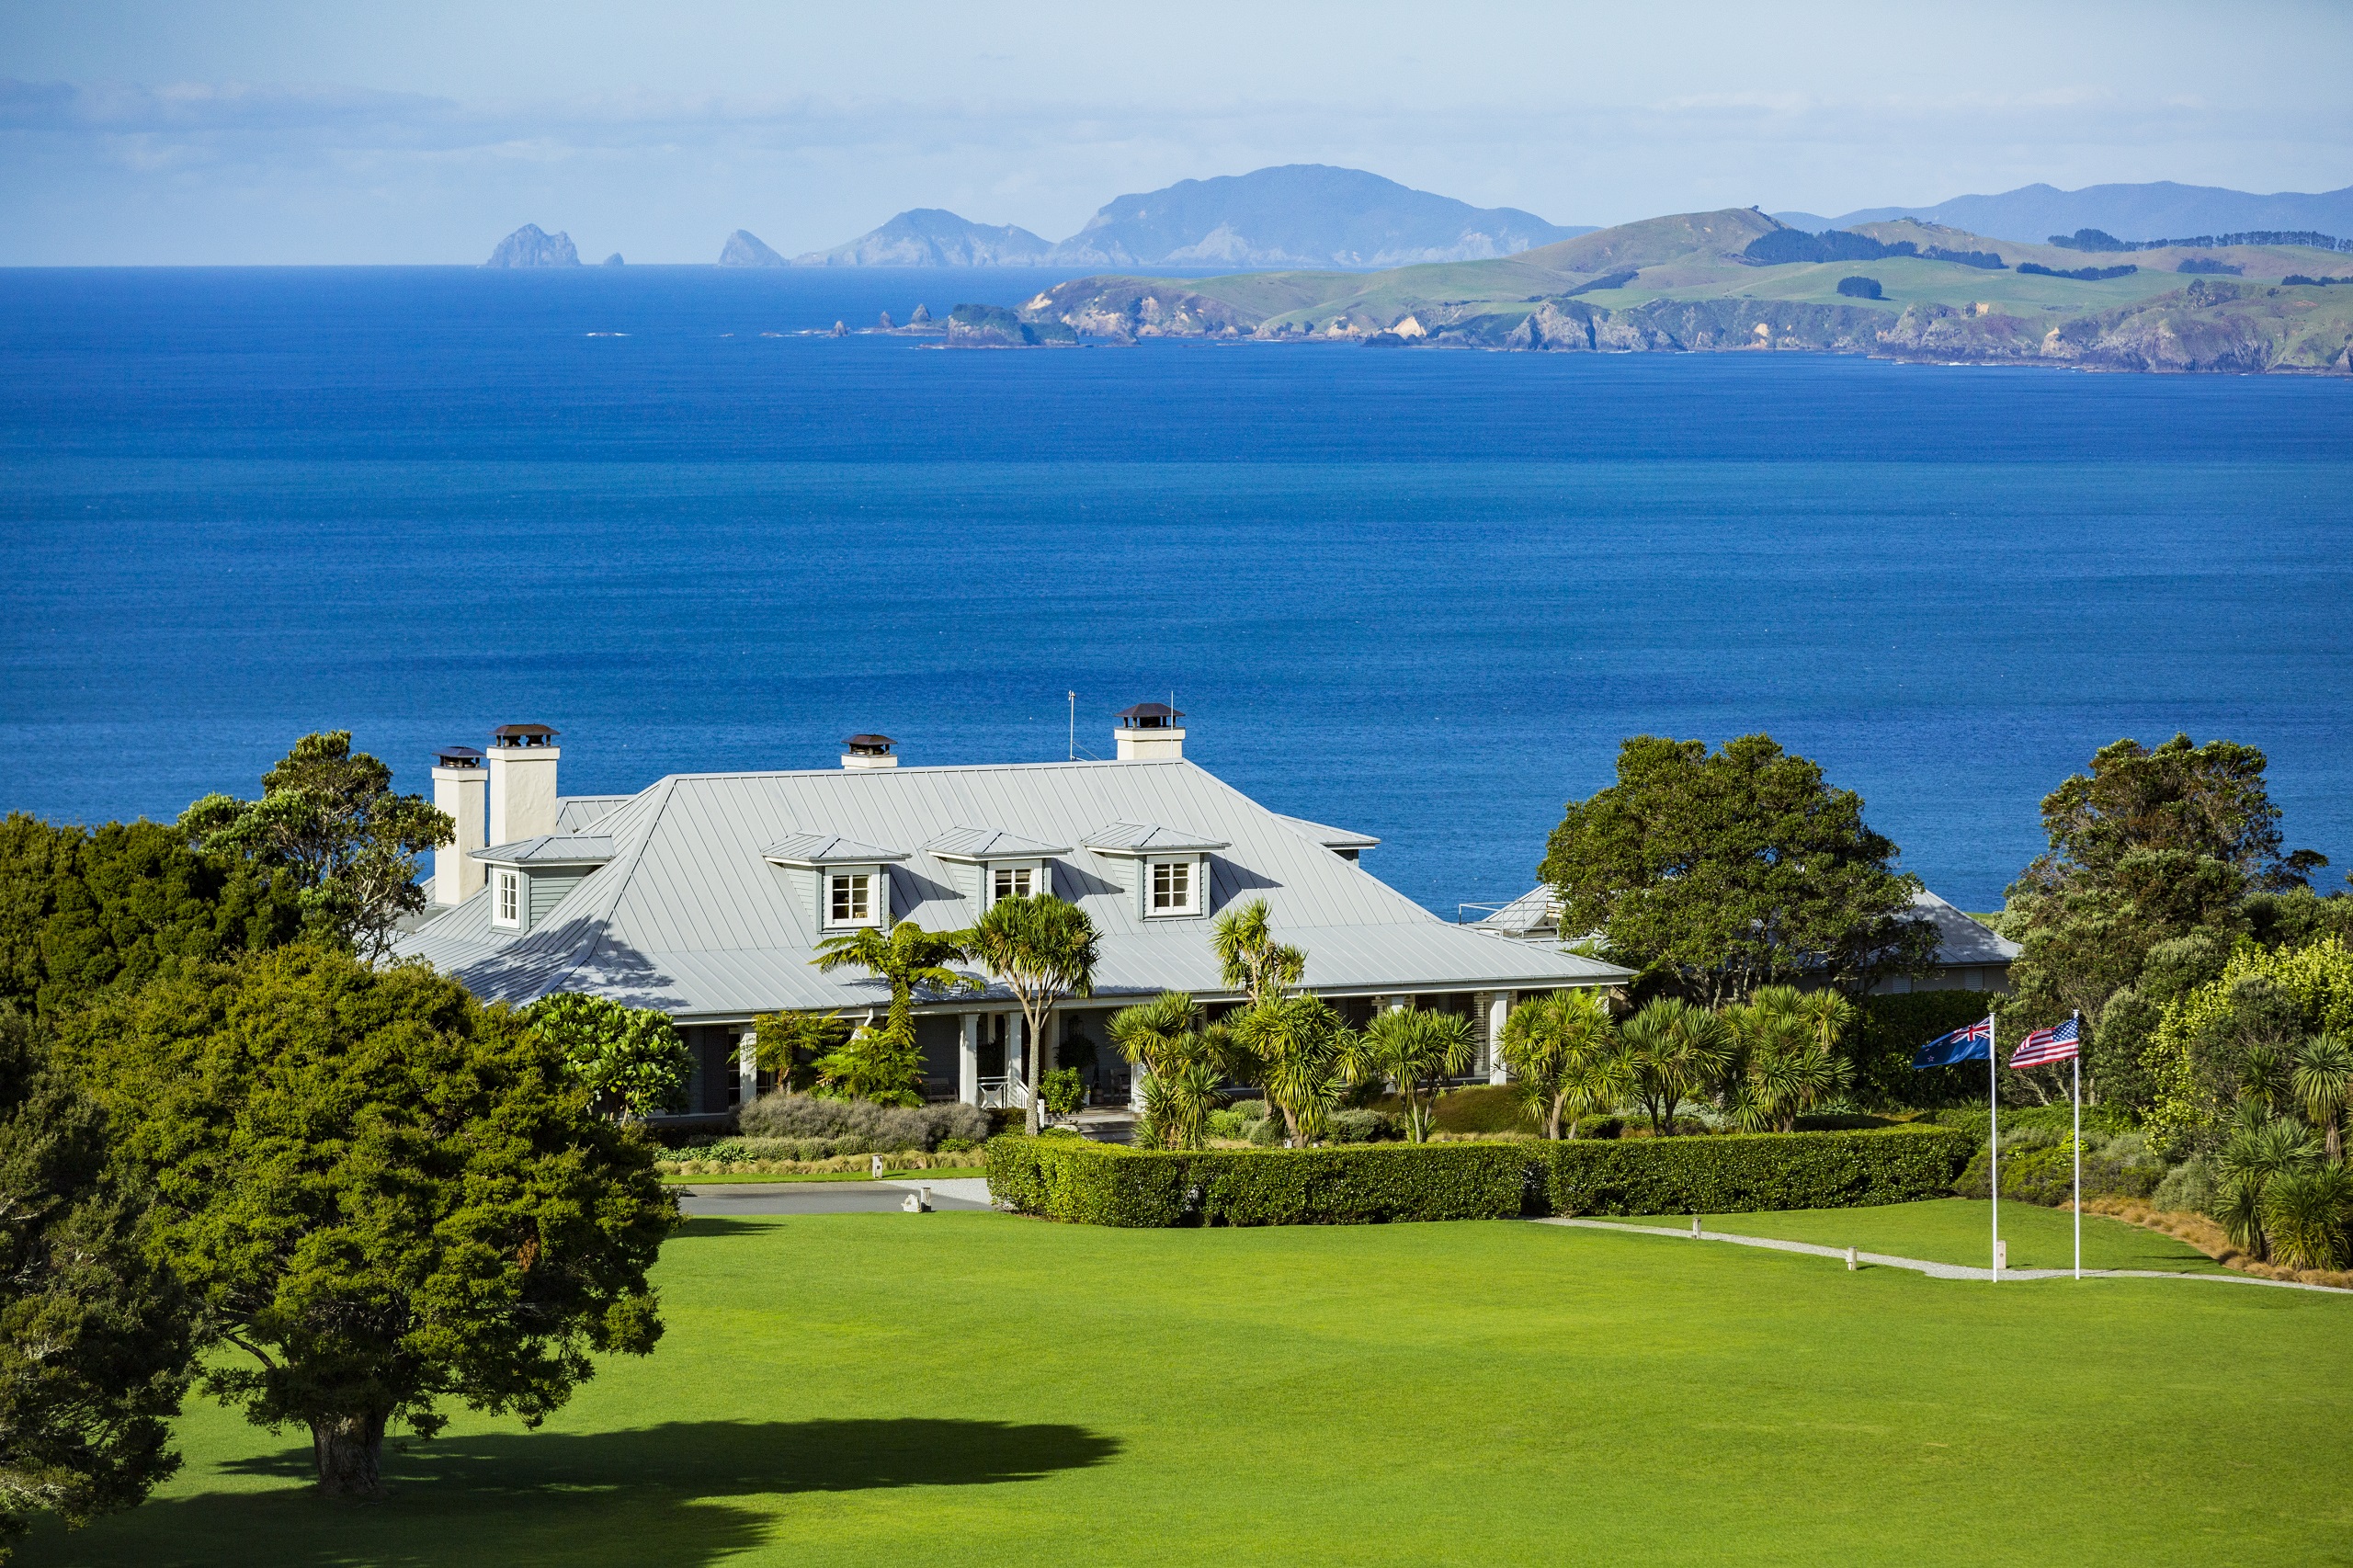 Exterior view over the lodge to the ocean at The Lodge at Kauri Cliffs